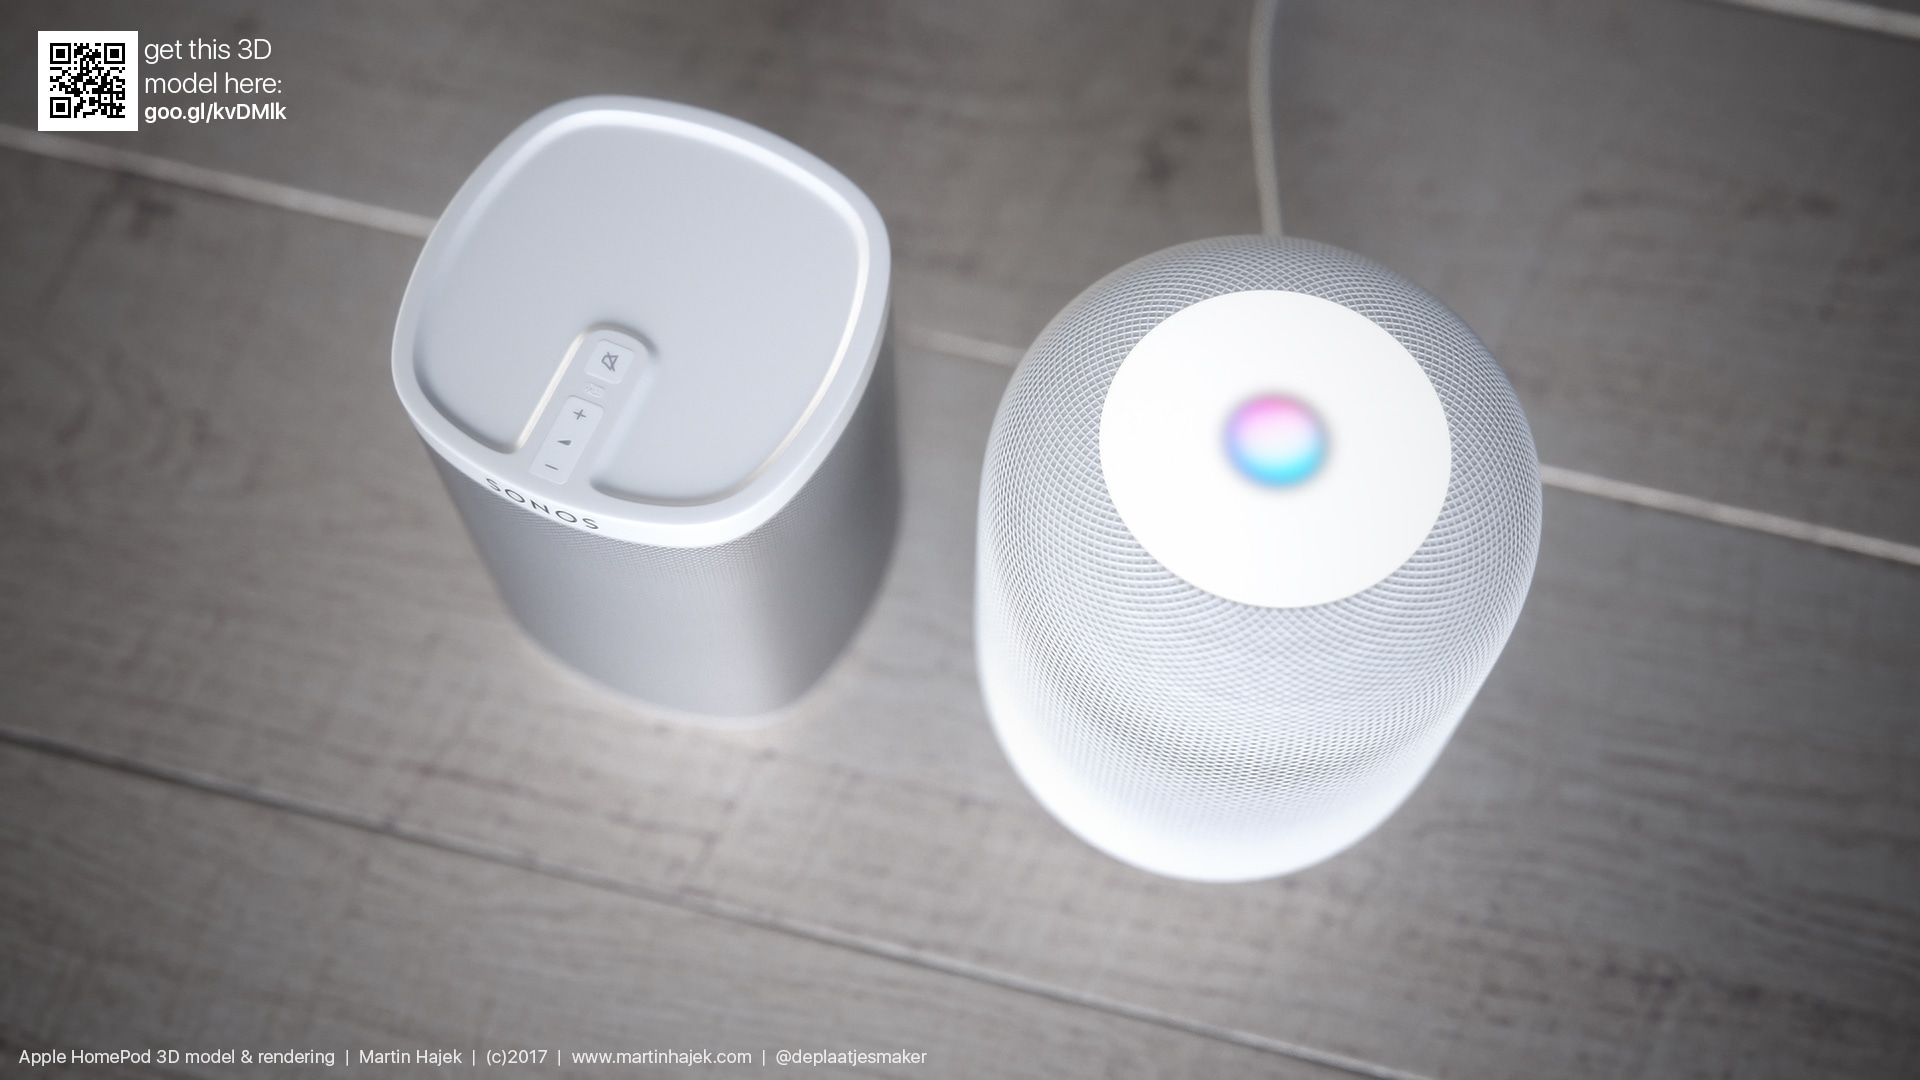 Renders give you a good idea of ​​what HomePod will look like next to a Sleep or Mac Pro